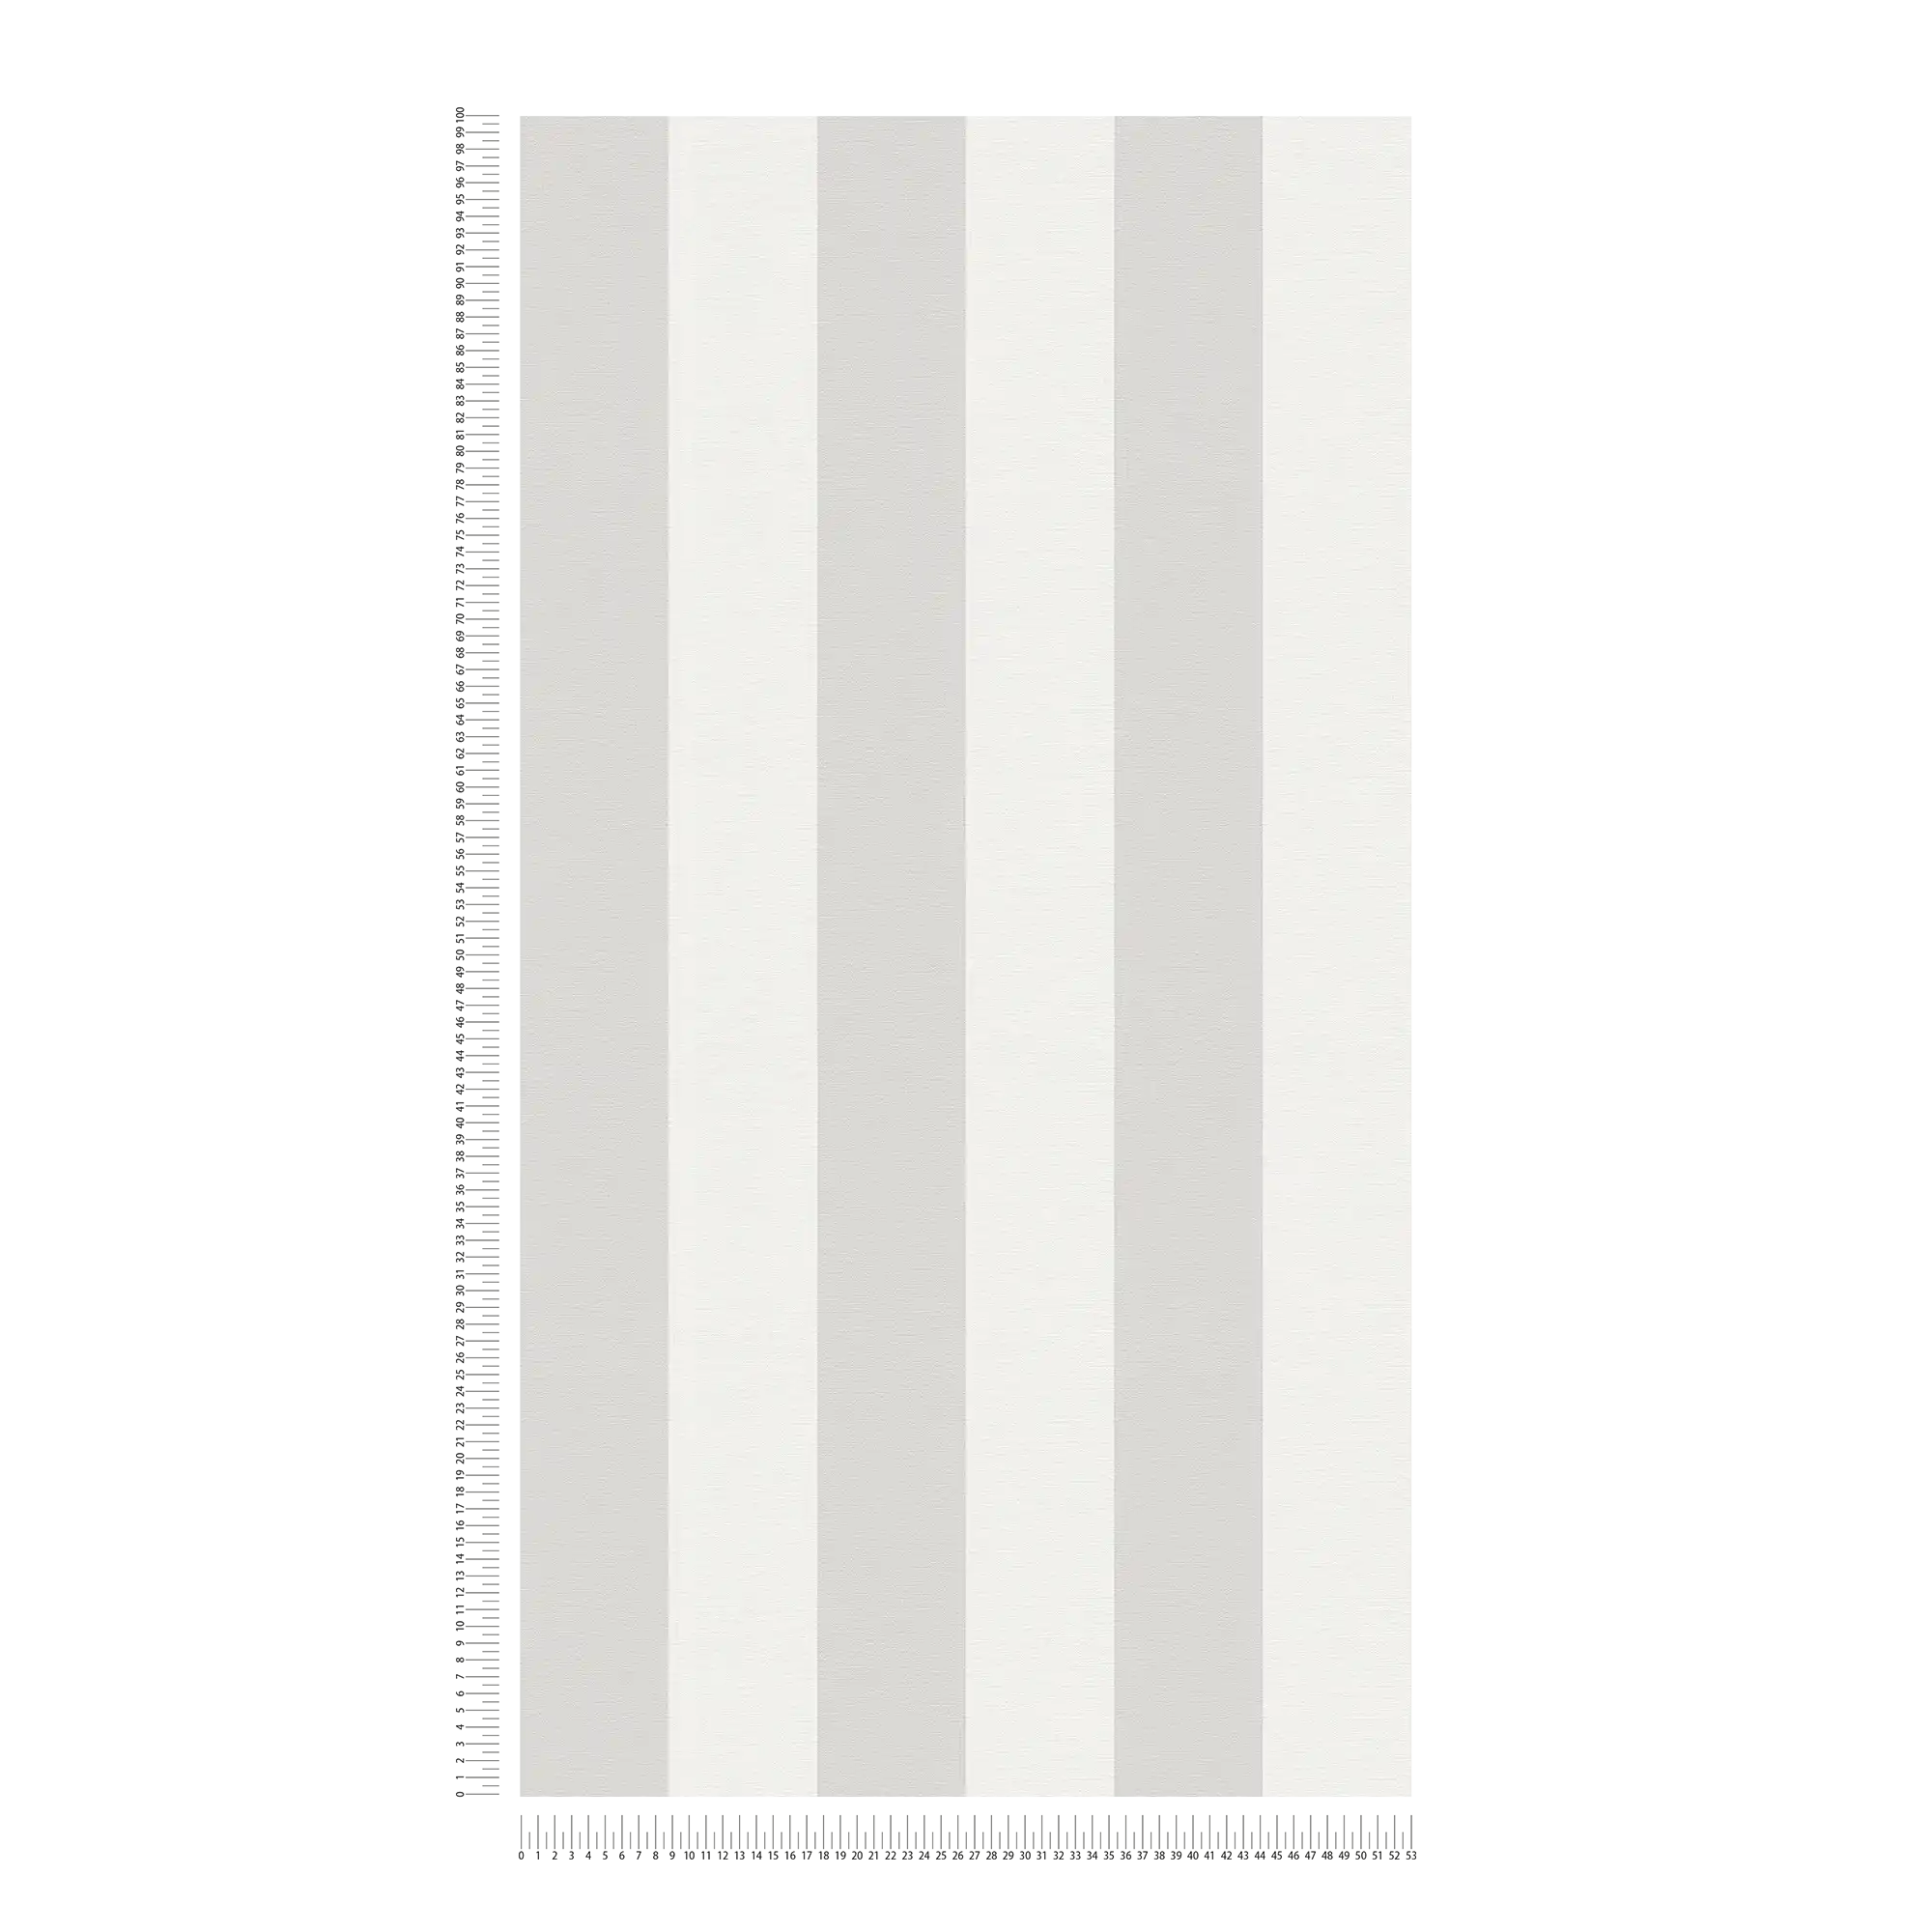             Block stripes wallpaper with textile look for young design - grey, white
        